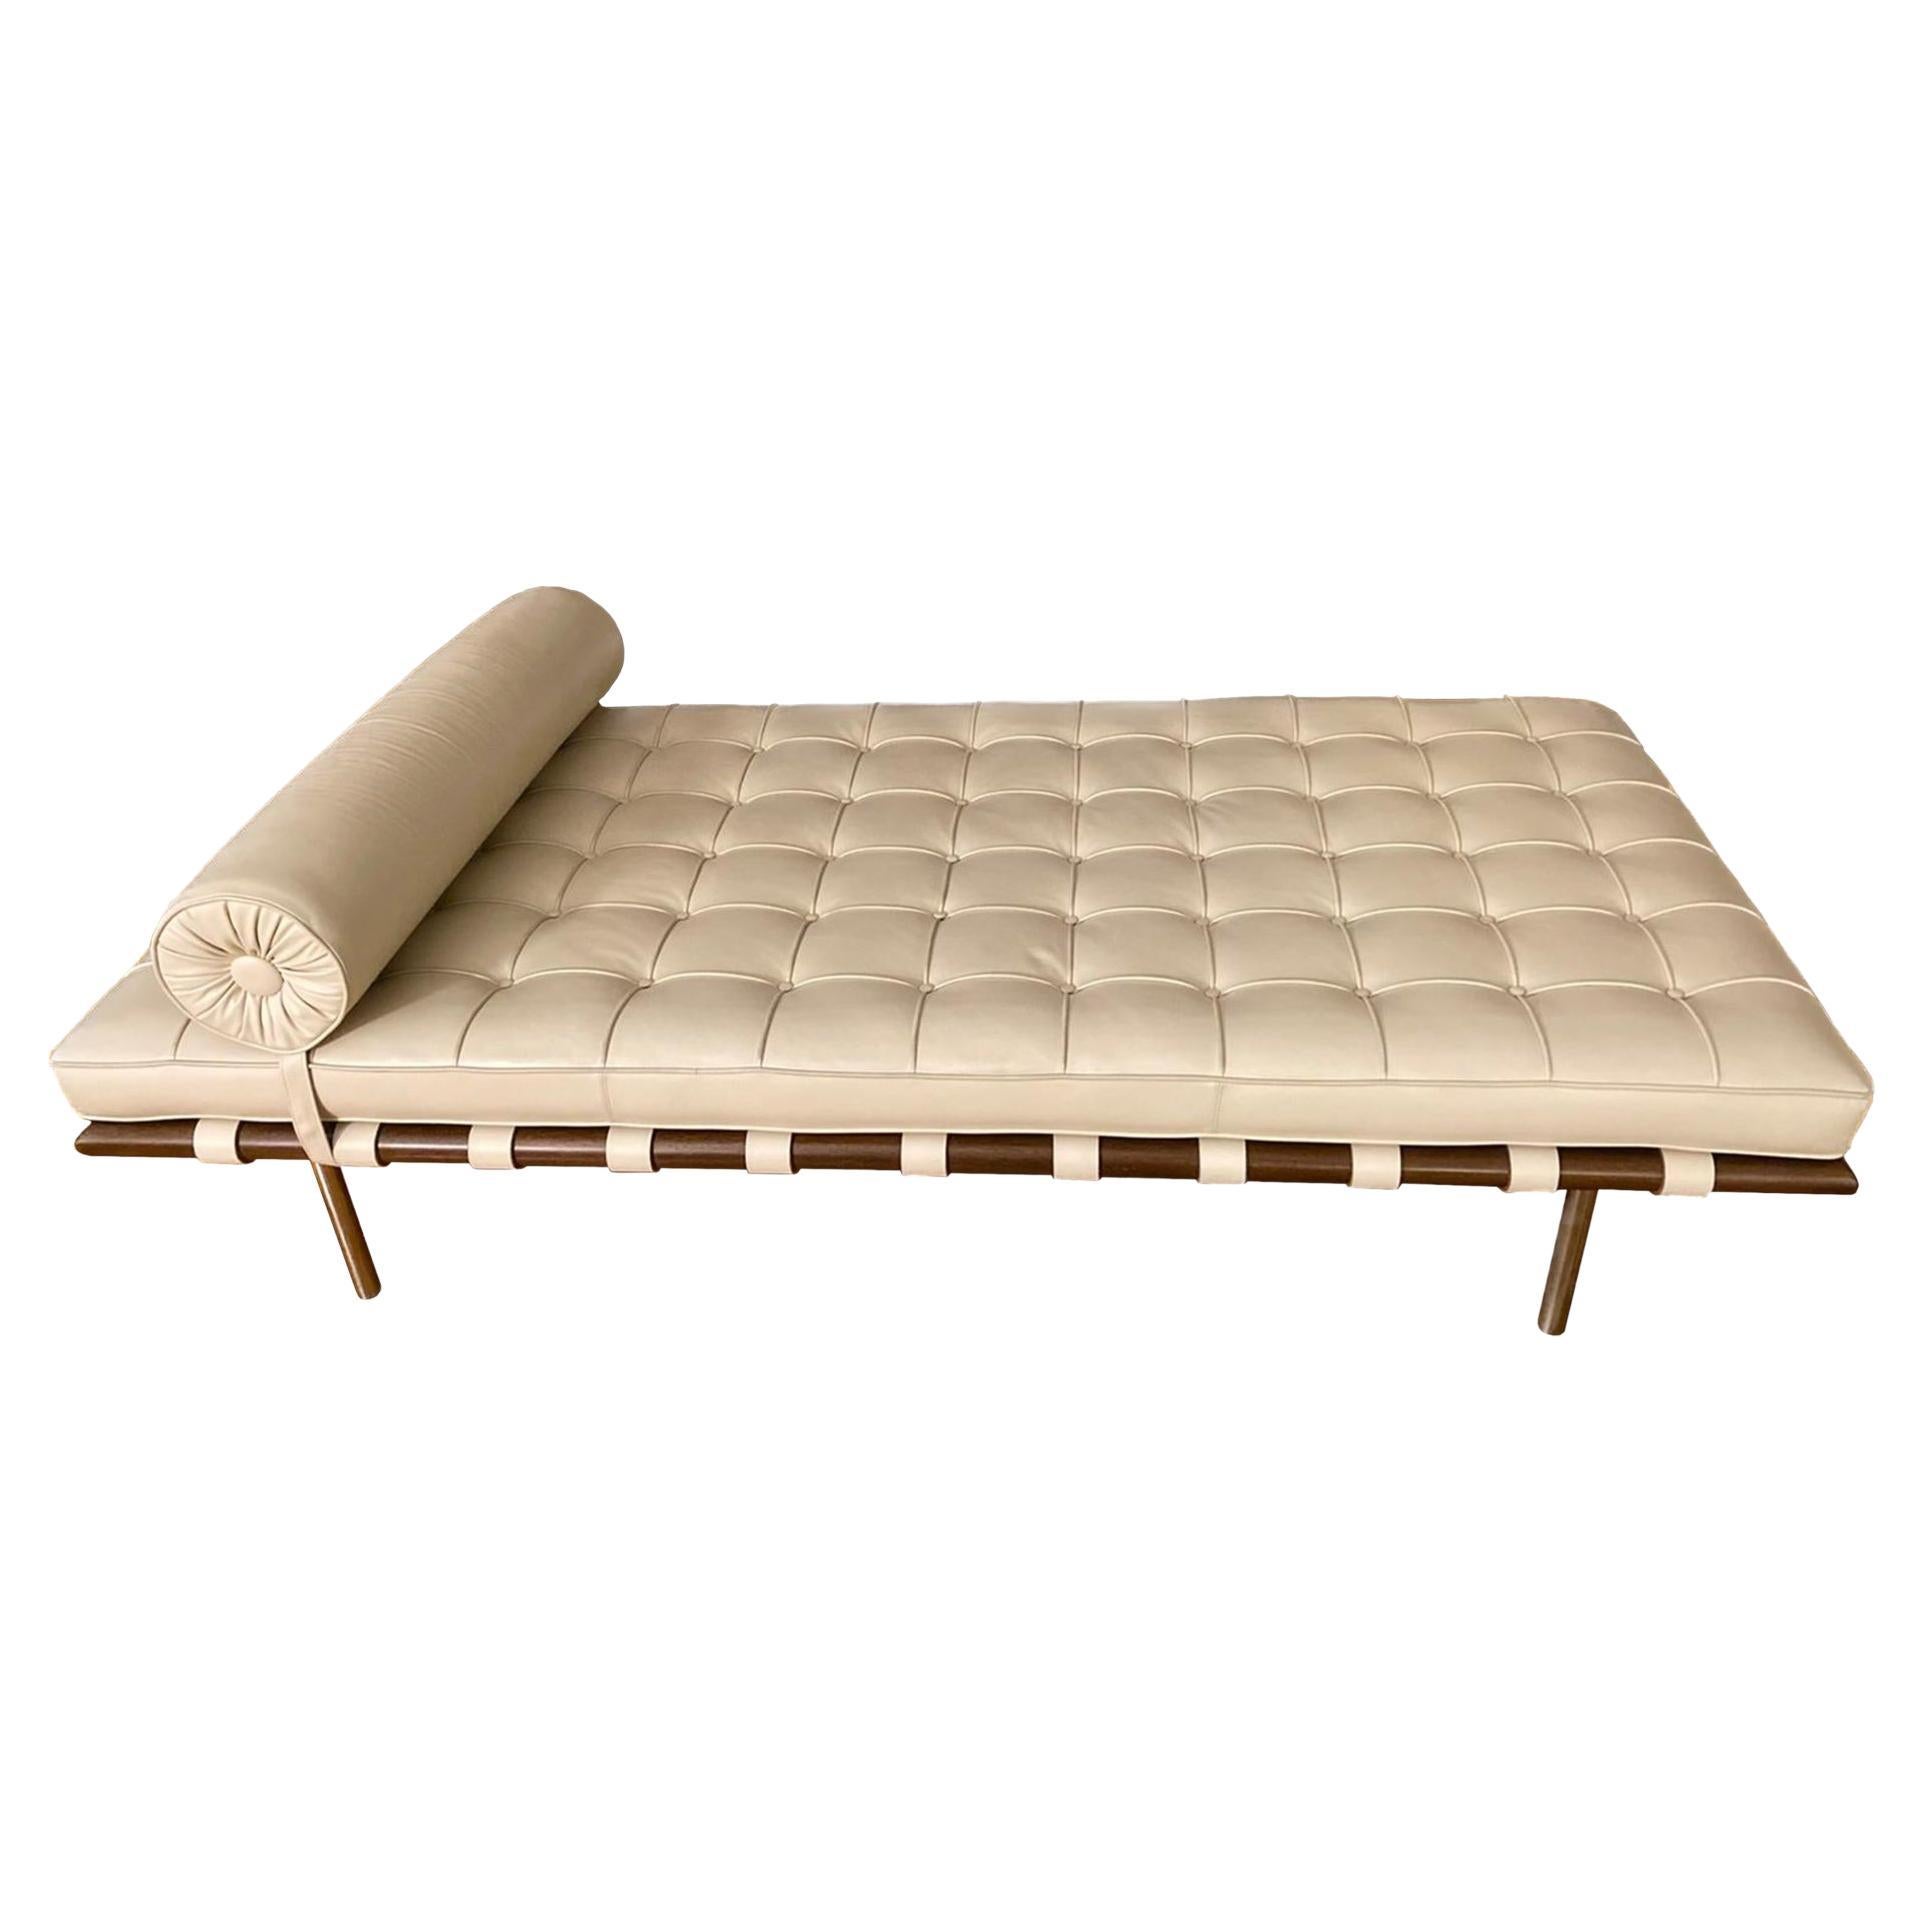 Ludwig Mies Van Der Rohe Bauhaus White Leather Barcelona Daybed for Knoll, 1970s For Sale